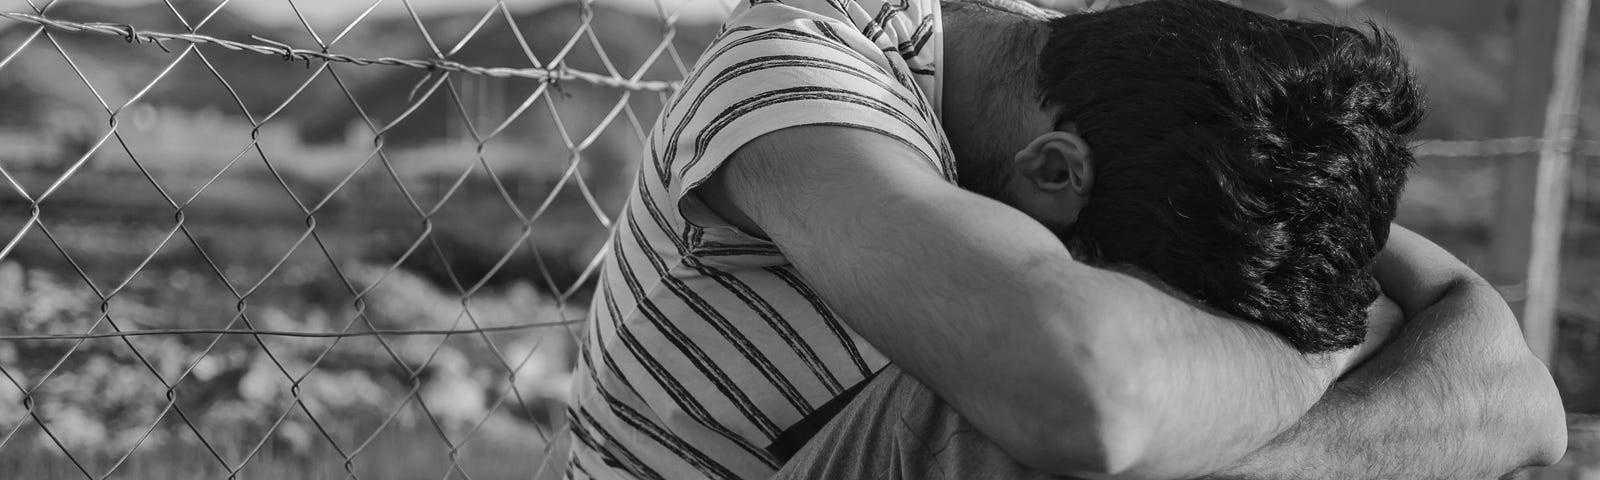 A young man in despair sitting against a chain link fence with his head bowed on his arms held up by his knees.